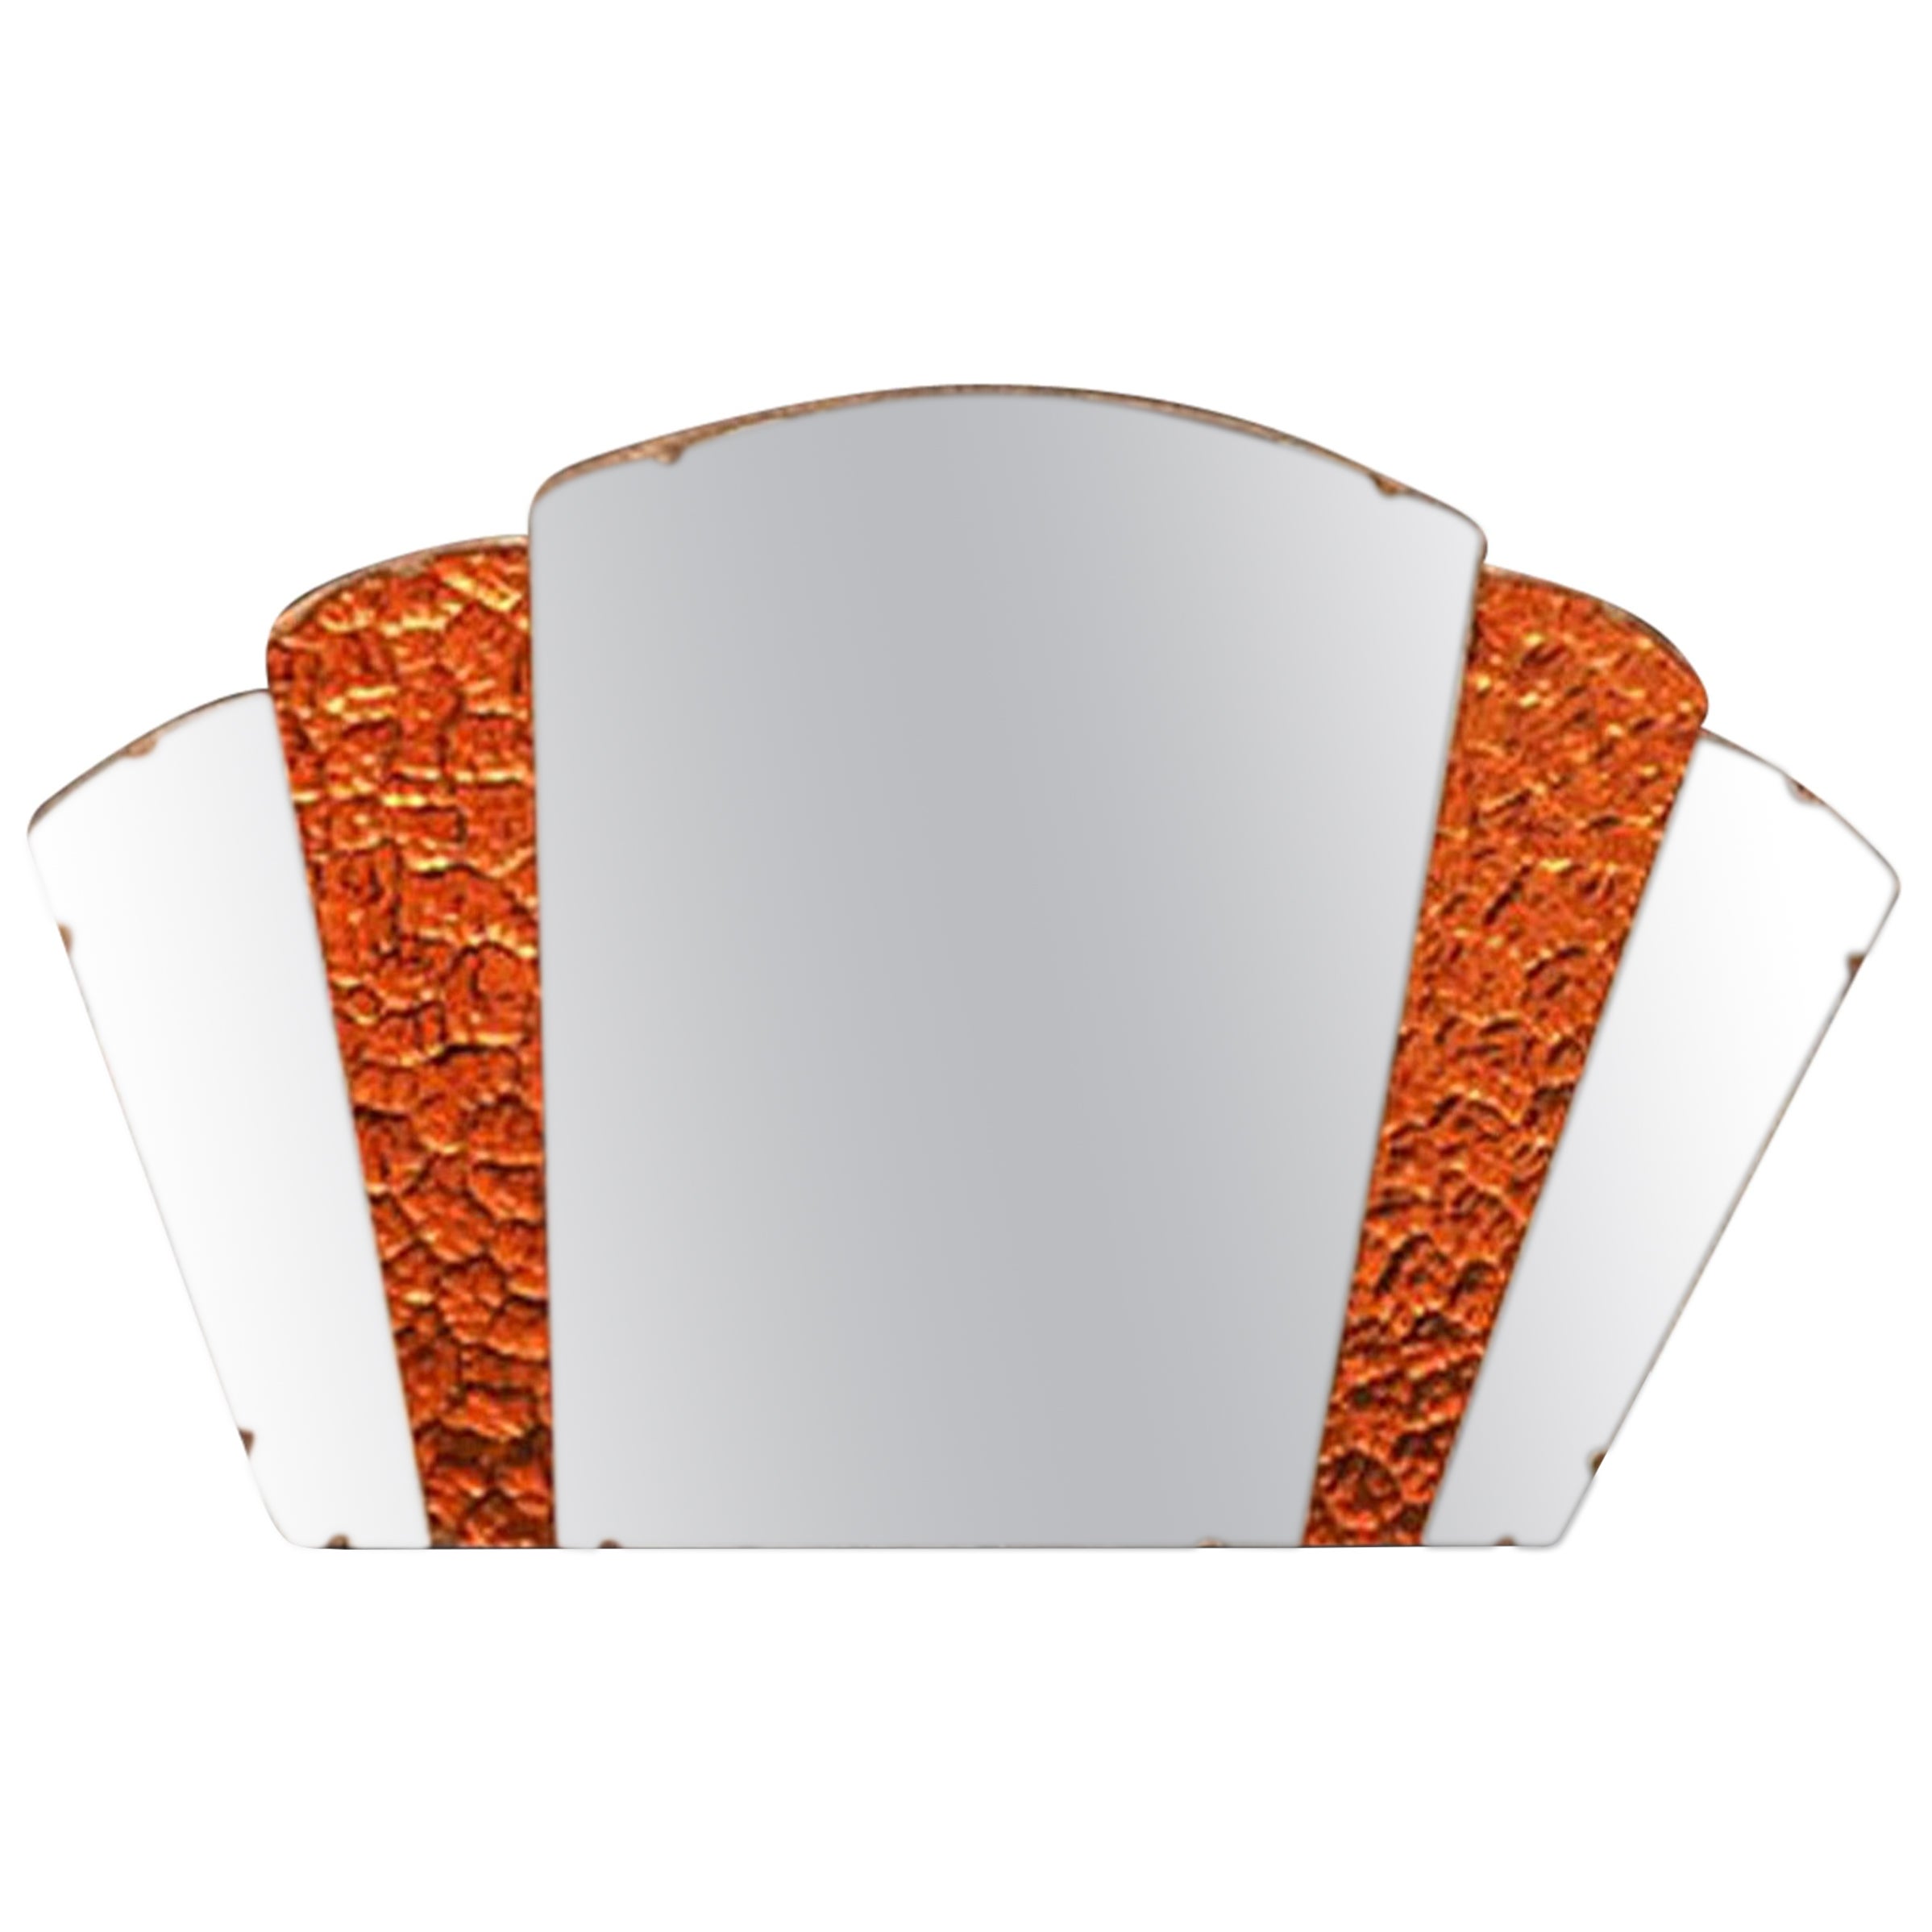 Art Deco Over Mantel Fan Wall Mirror with Attractive Amber Glass Panels 1930's